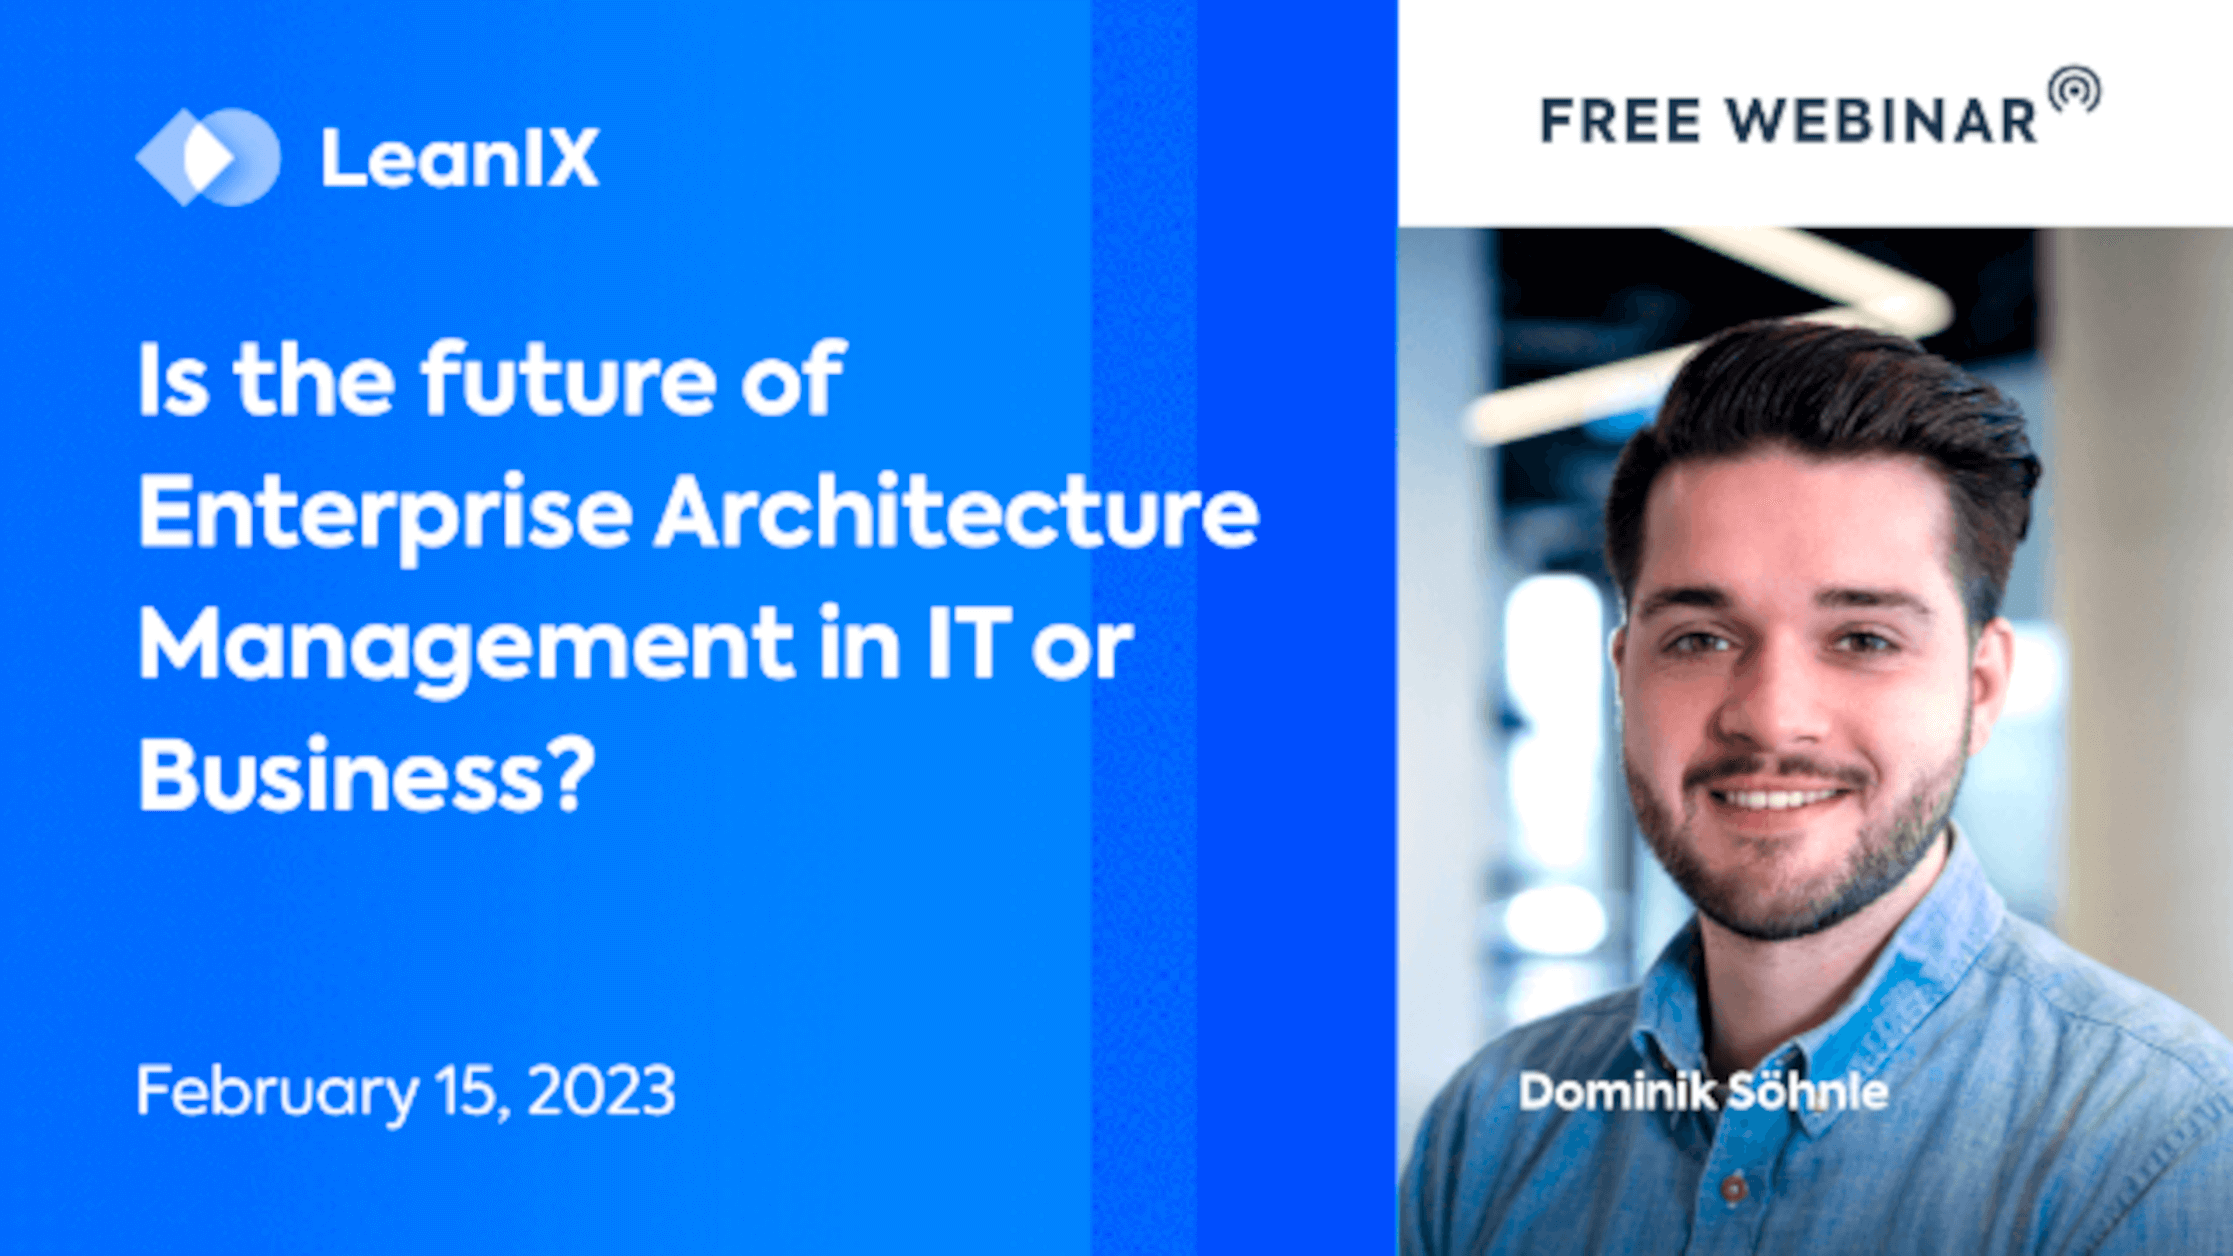 The Future Of Enterprise Architecture: IT or Business?